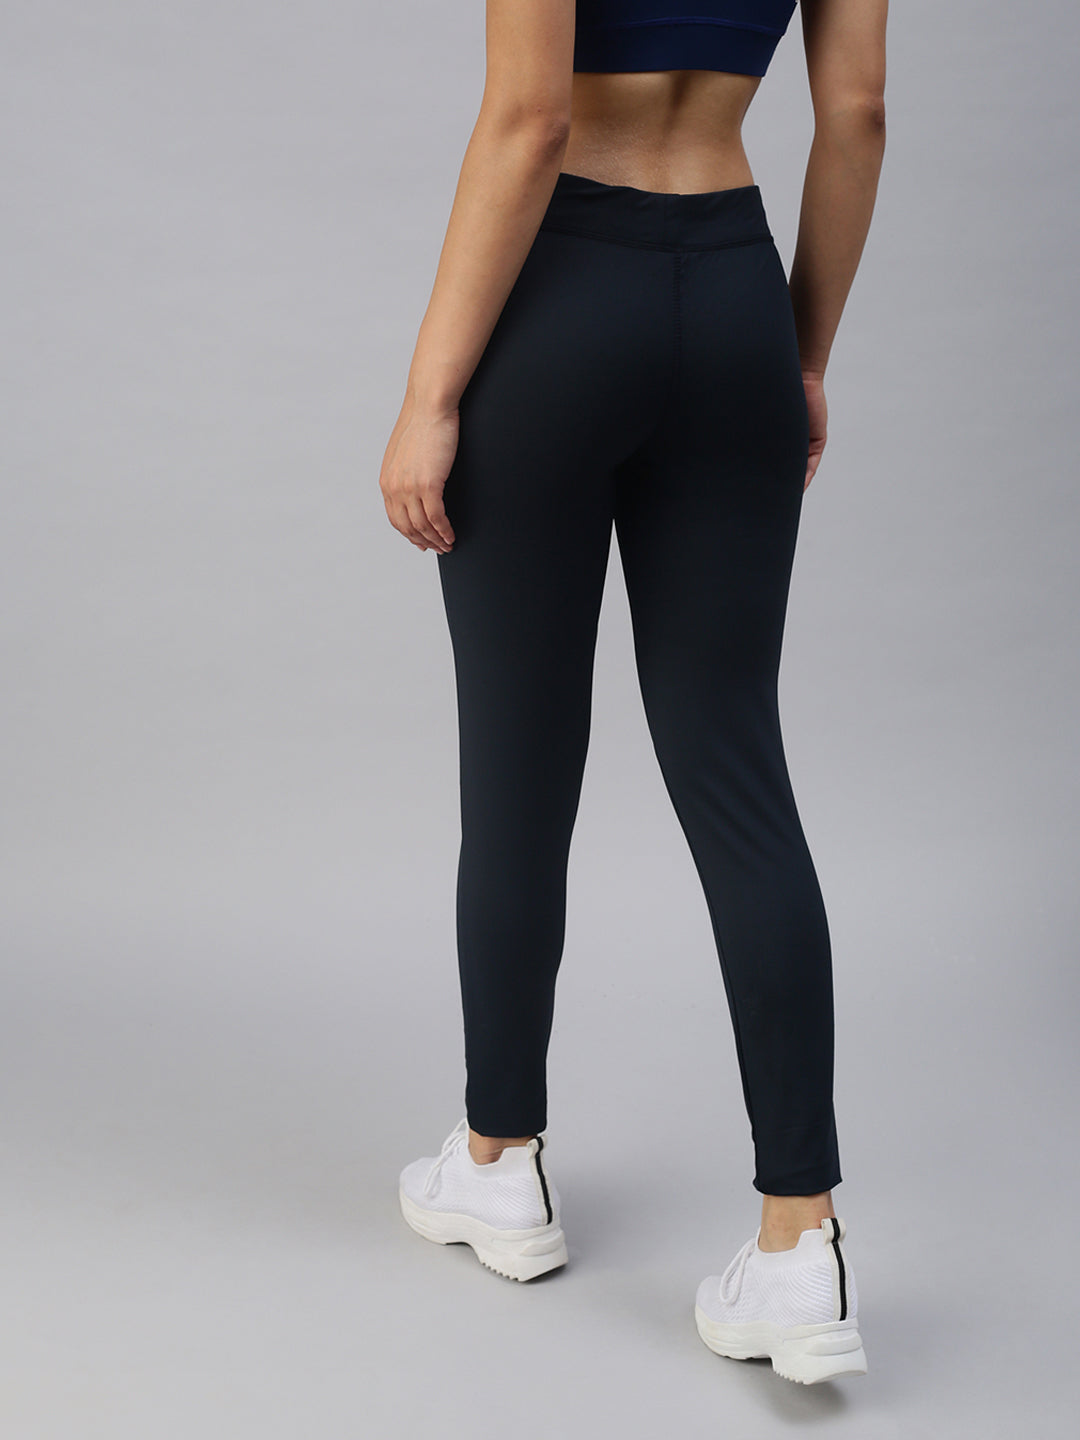 Women's Navy Blue Solid Track Pants